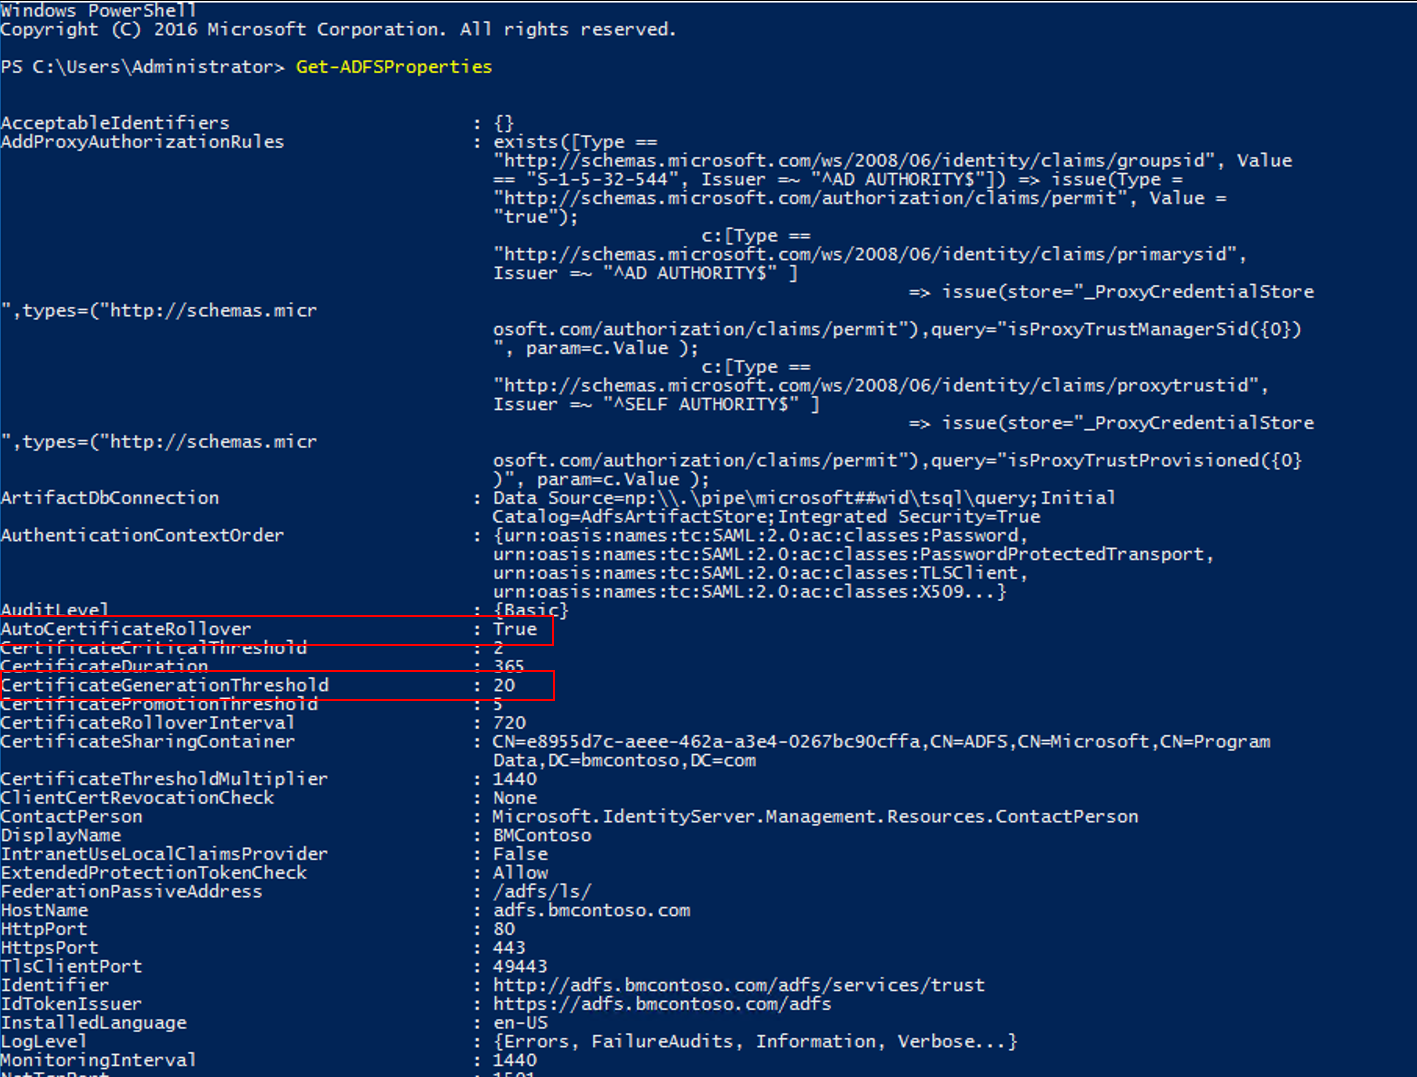 Screenshot of the PowerShell window, highlighting the AutoCertificateRollover and CertificateGenerationThreshold values.